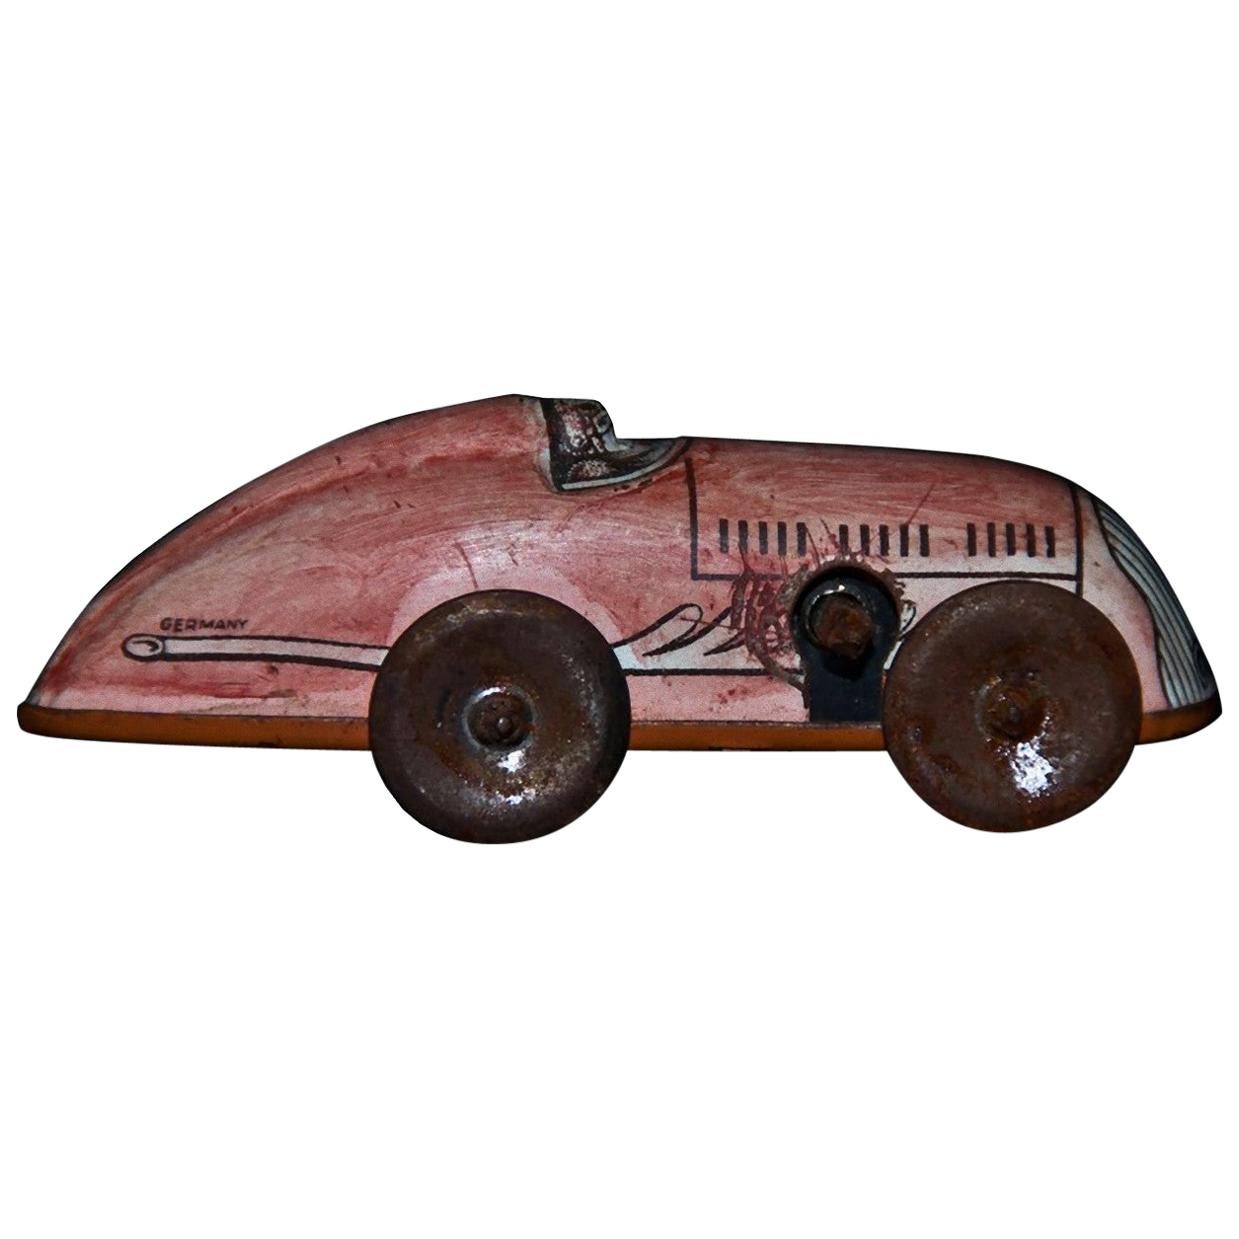 Vintage Wind Up Small Car Toy, Made in Germany, 1950s